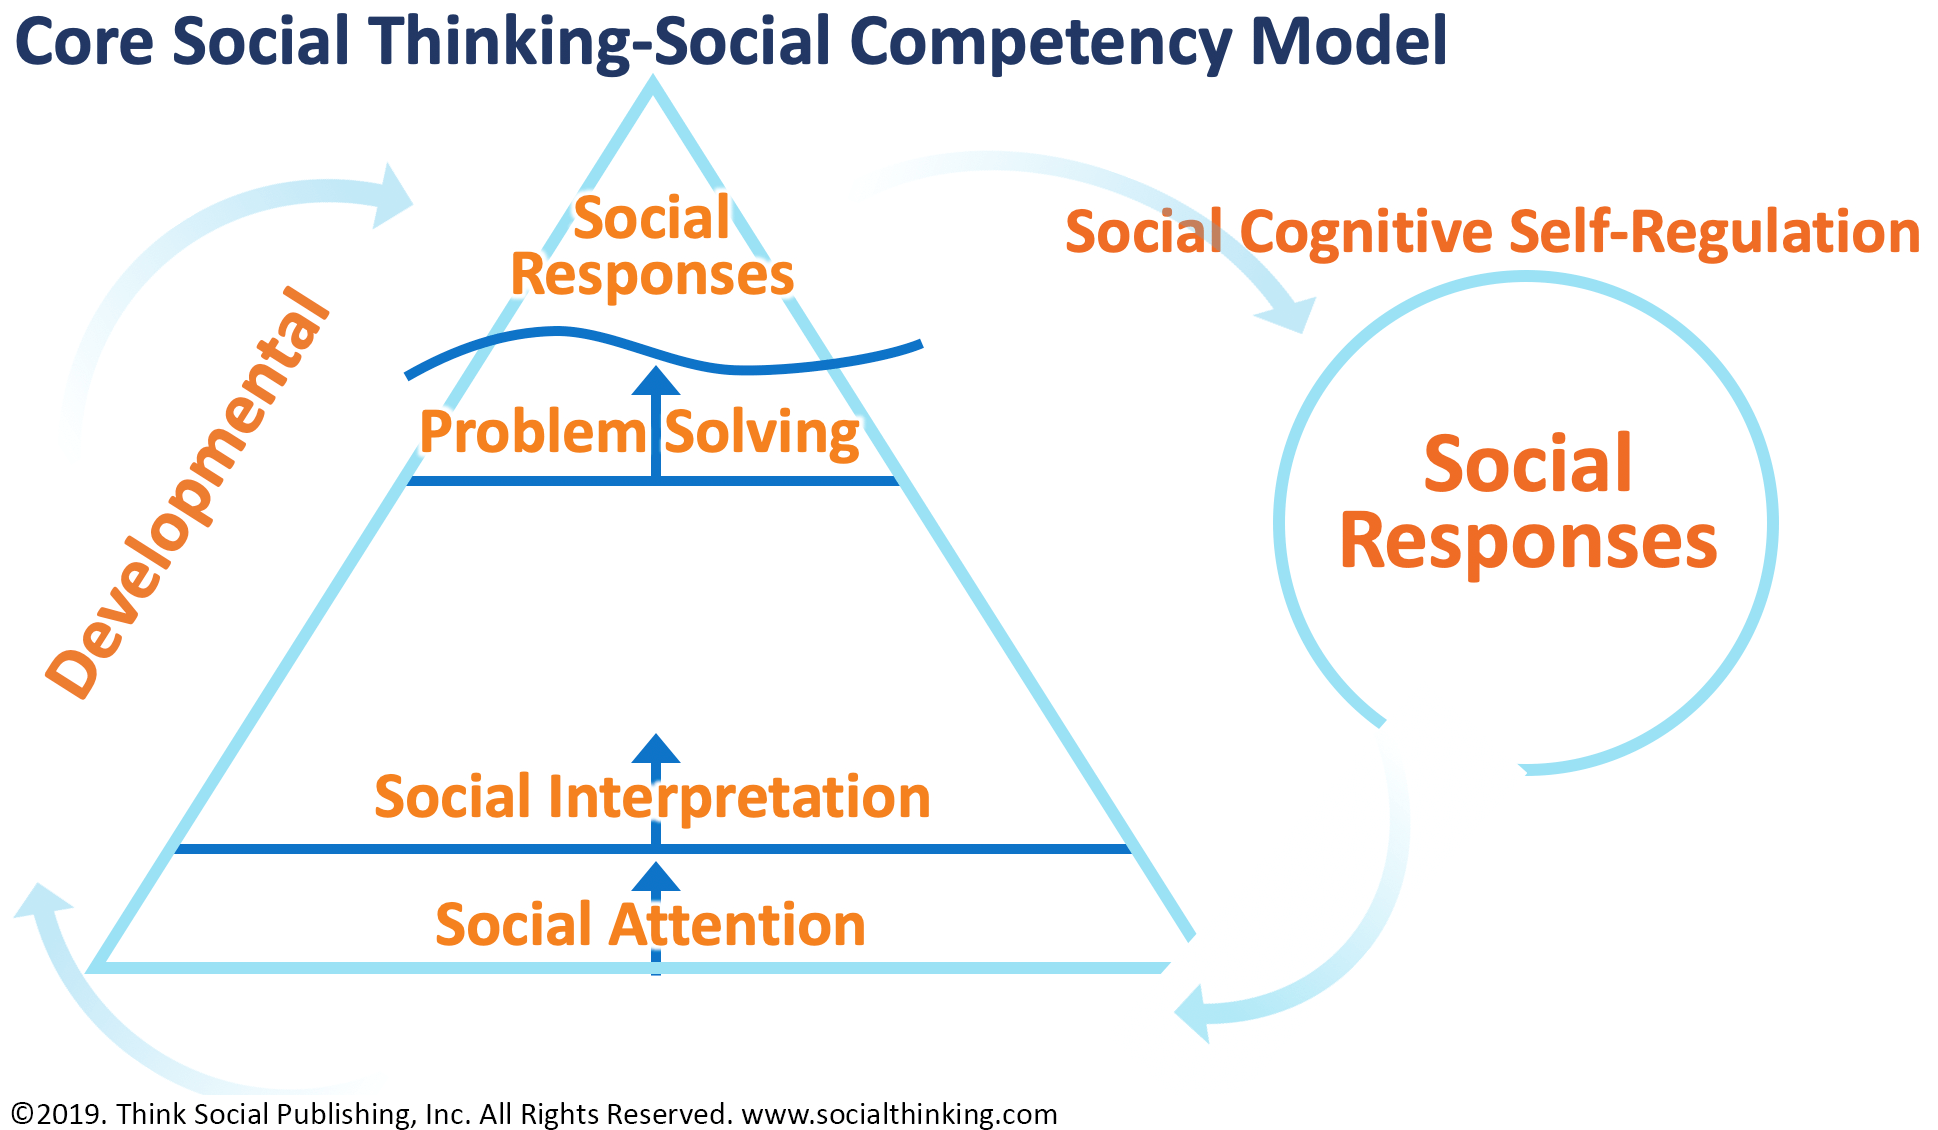 Social Competency Model - Image 2